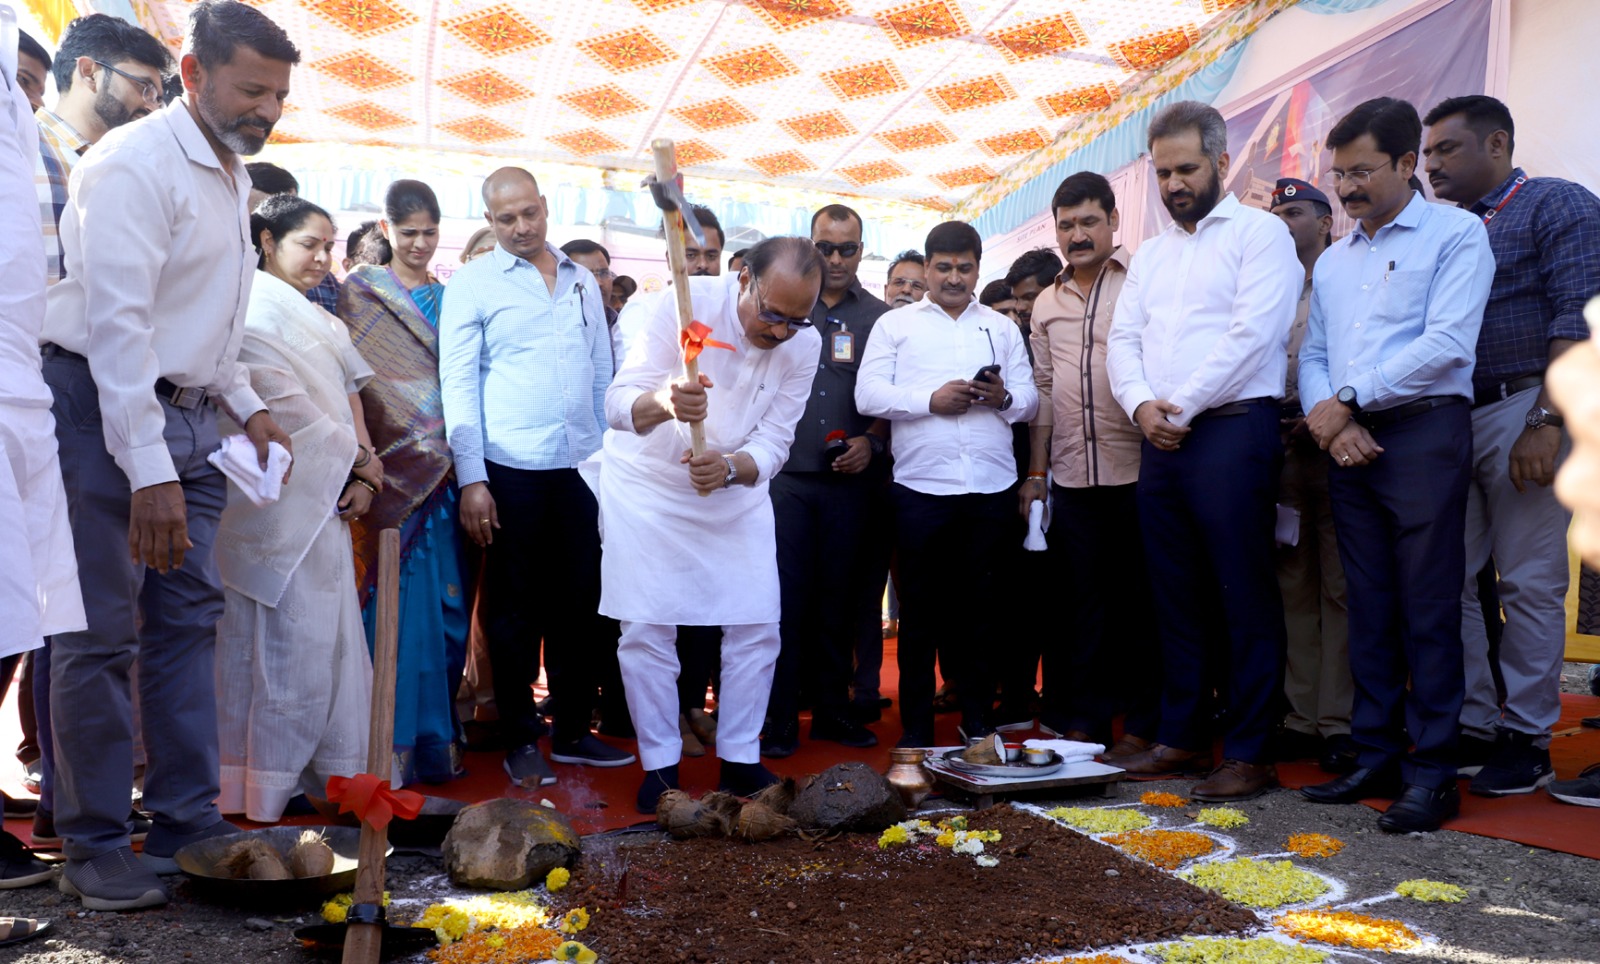 Inauguration of various projects of Pimpri-Chinchwad Municipal Corporation by Deputy Chief Minister Ajit Pawar